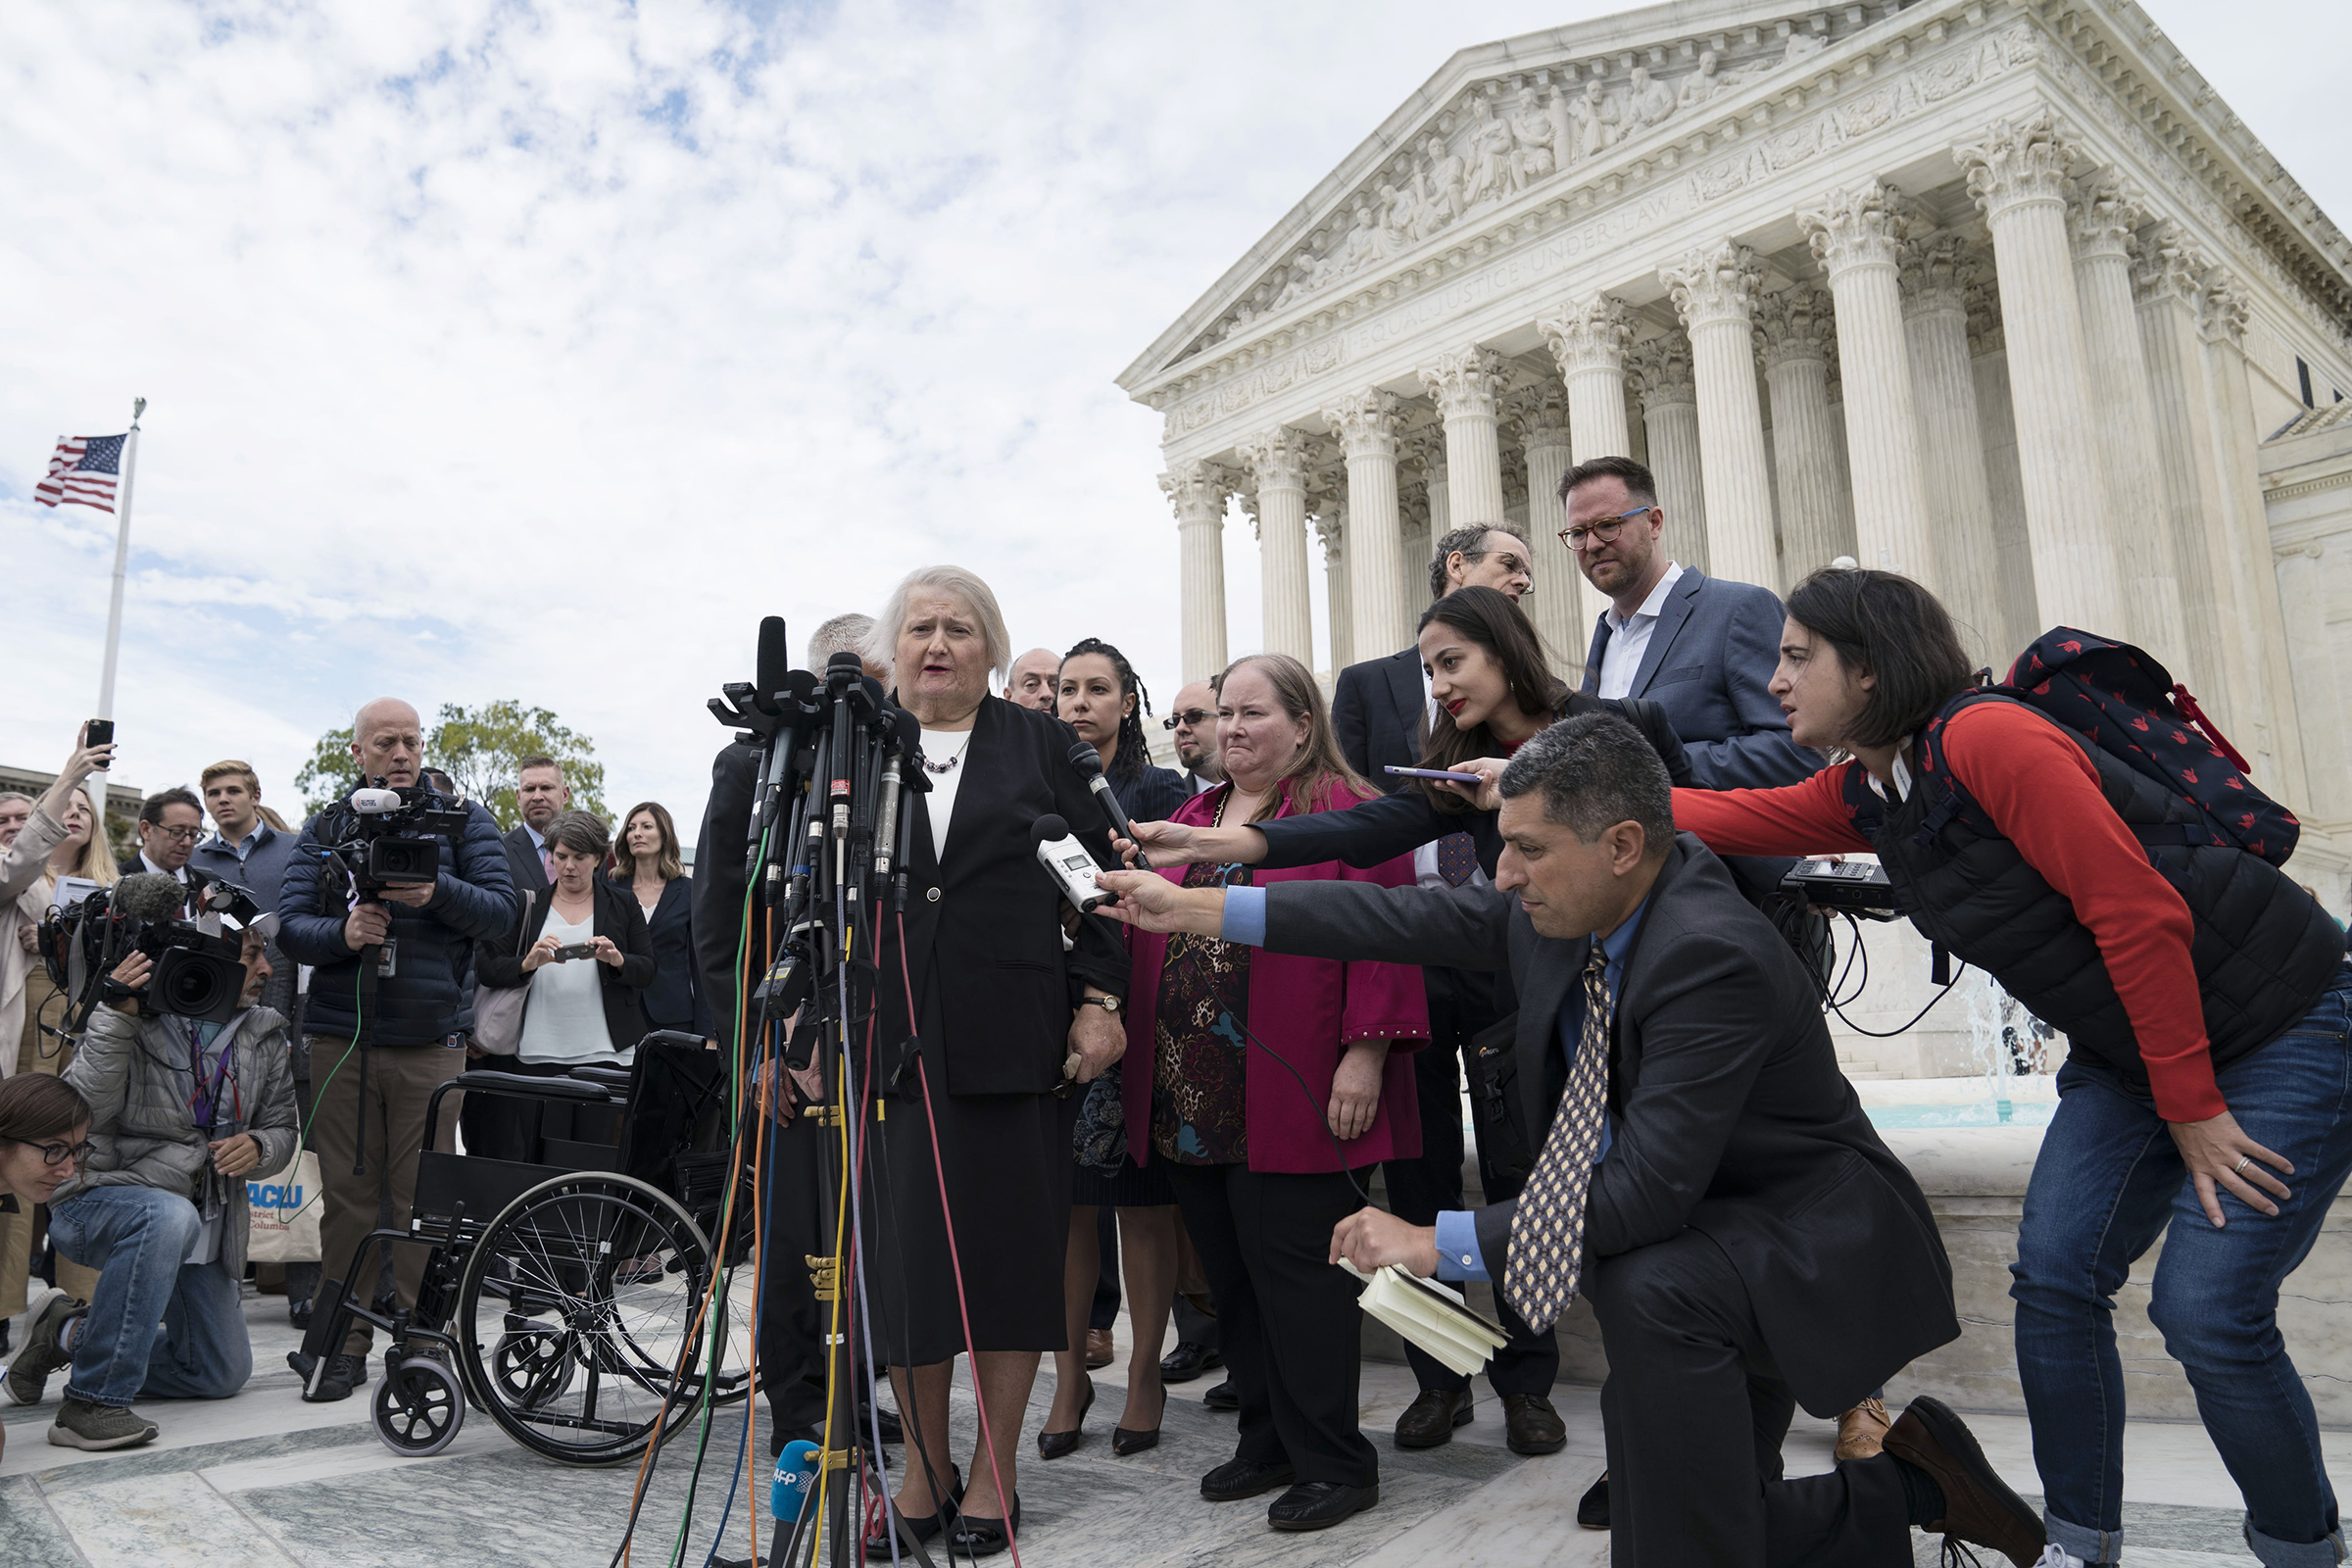 Aimee Stephens speaks outside of the Supreme Court in Washington, D.C., on Oct. 8, 2019. (Sarah Silbiger—Bloomberg/Getty Images)